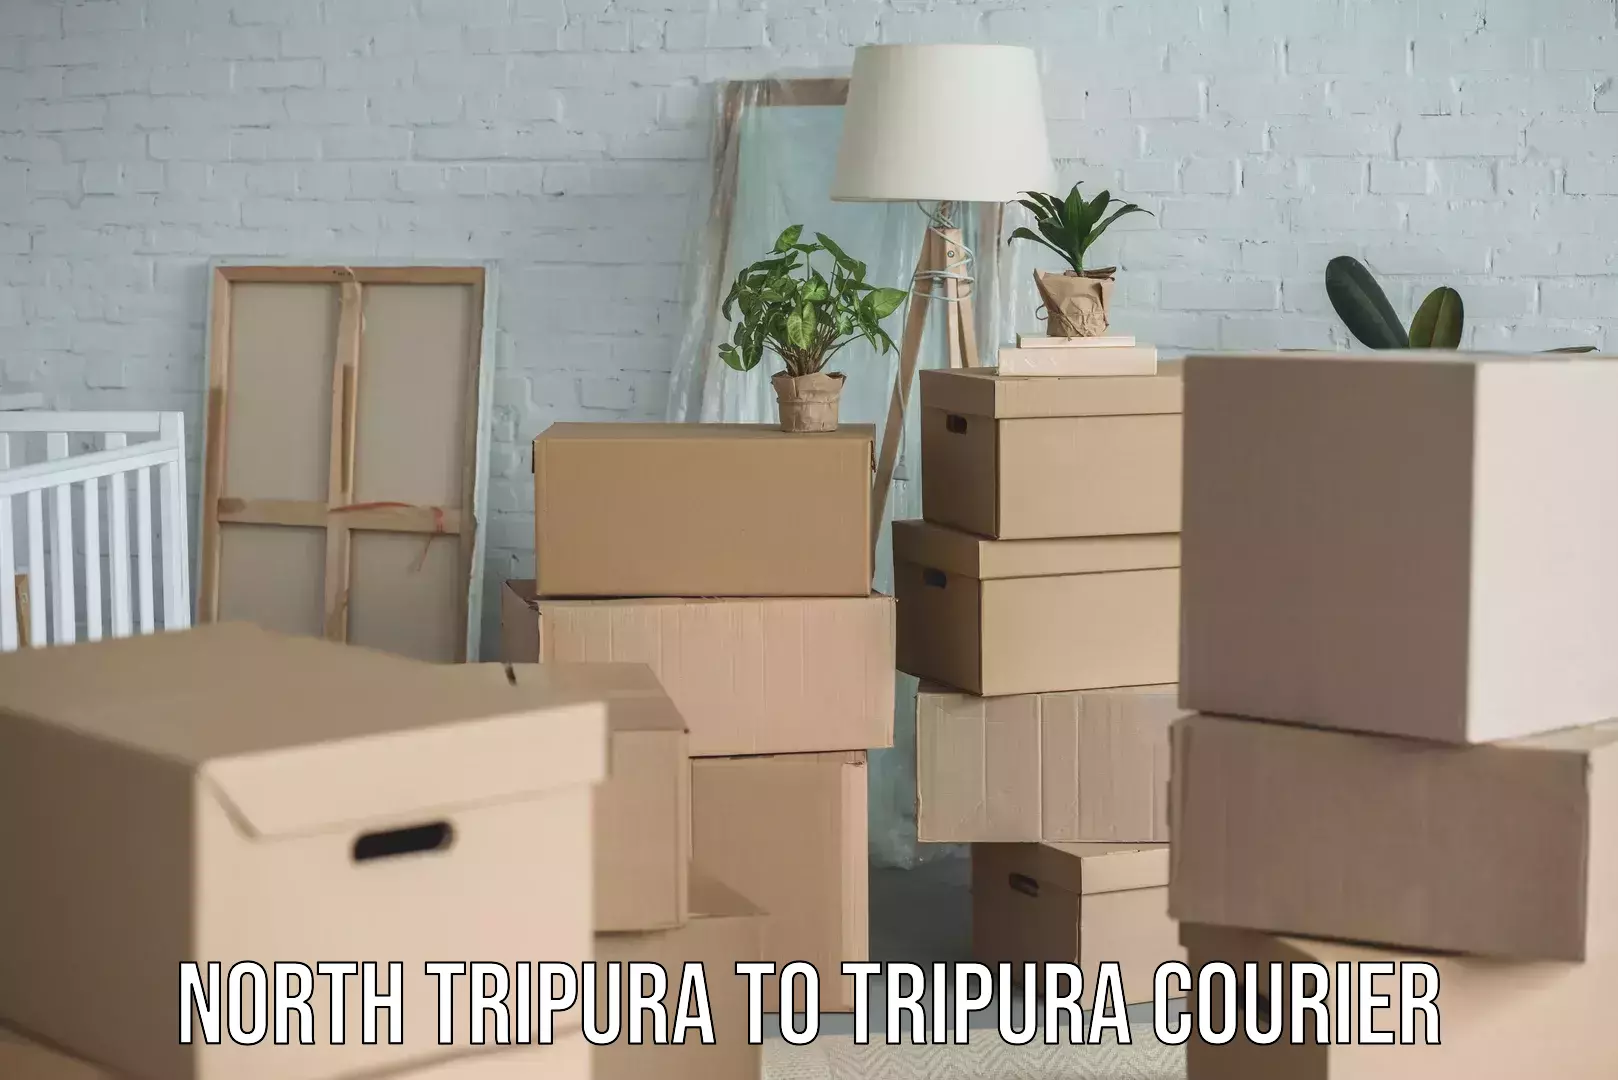 Reliable delivery network North Tripura to Tripura